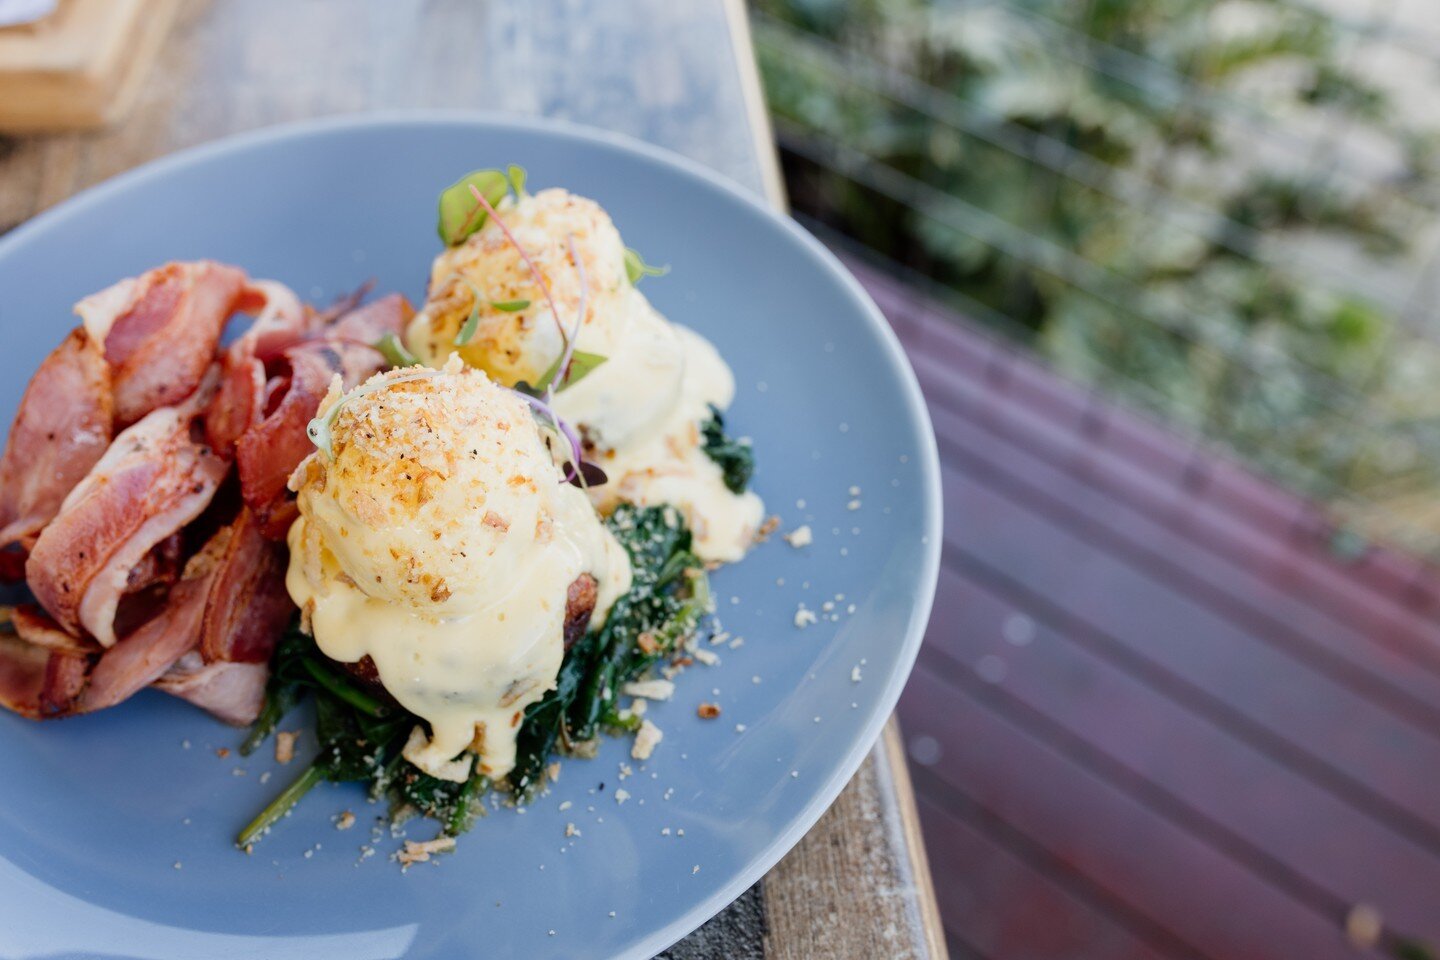 Any day is a good day for a Hash Benedict
*
*
*
*
*
#wearegoldcoast  #hellogoldcoast  #food  #breakfast  #brunch  #goldcoasteats #eggsbenedict #bacon